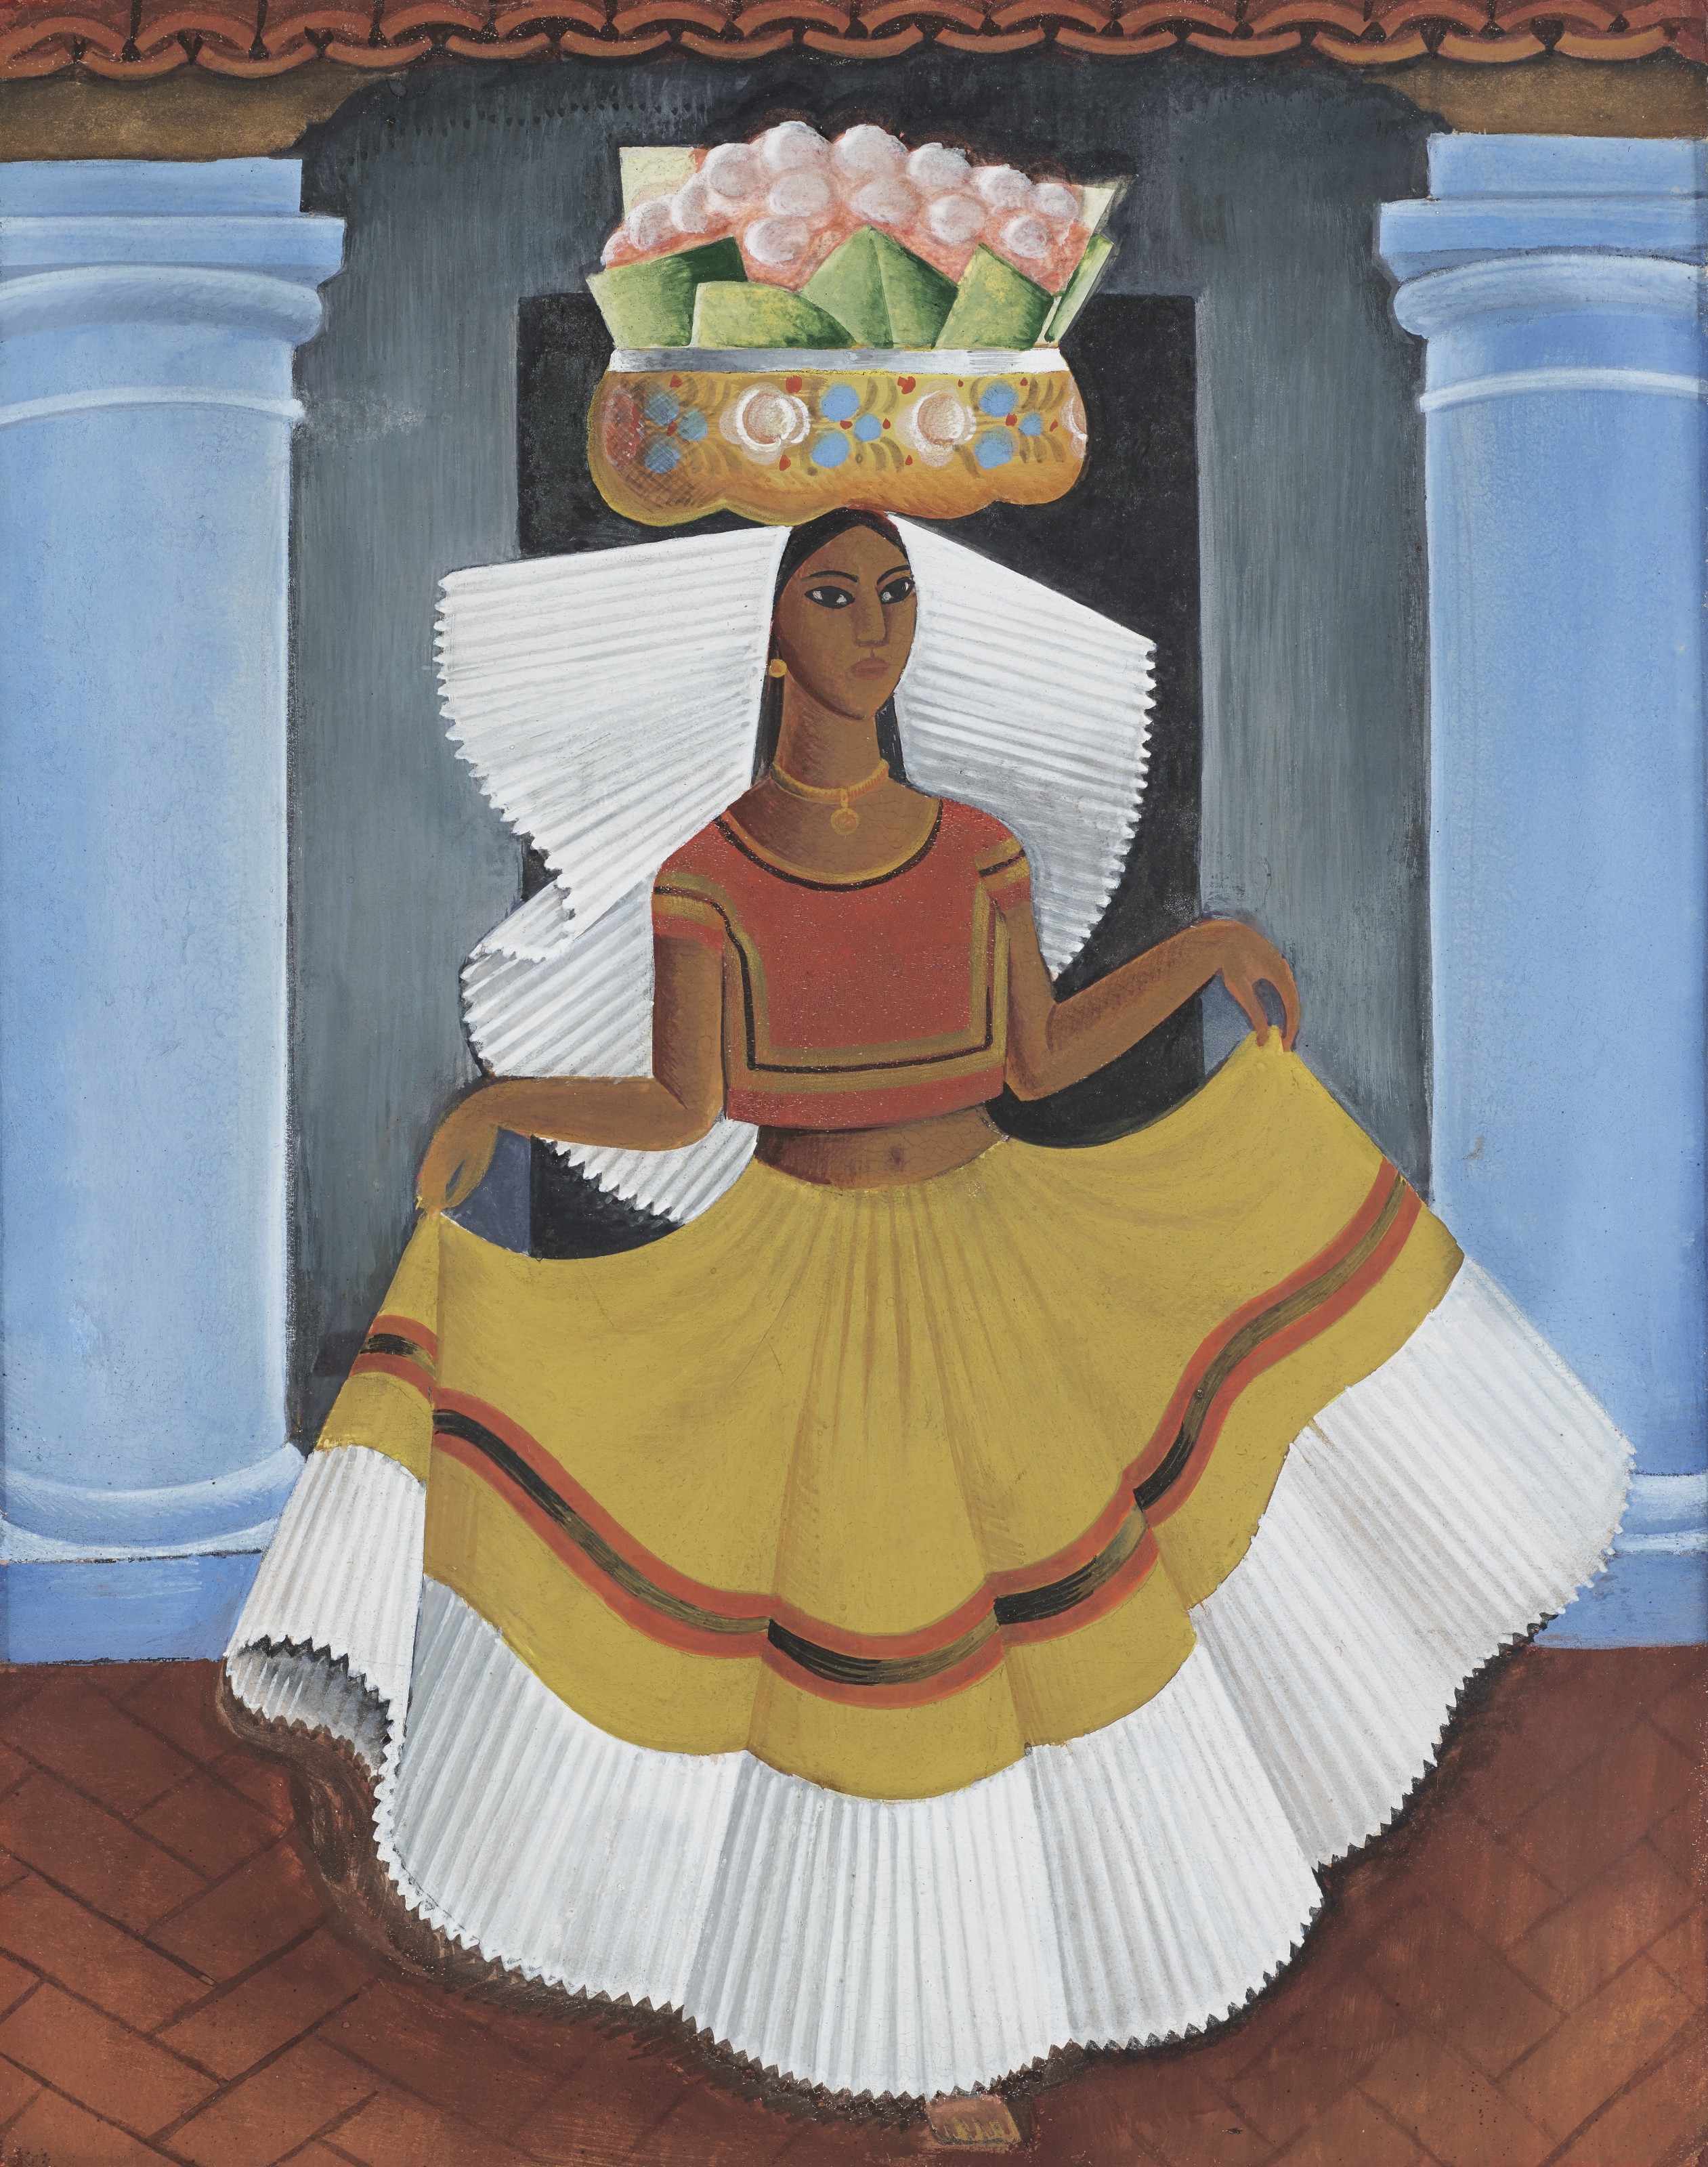 Artwork by Miguel Covarrubias, Tehuana with Basket, Made of gouache on cardboard